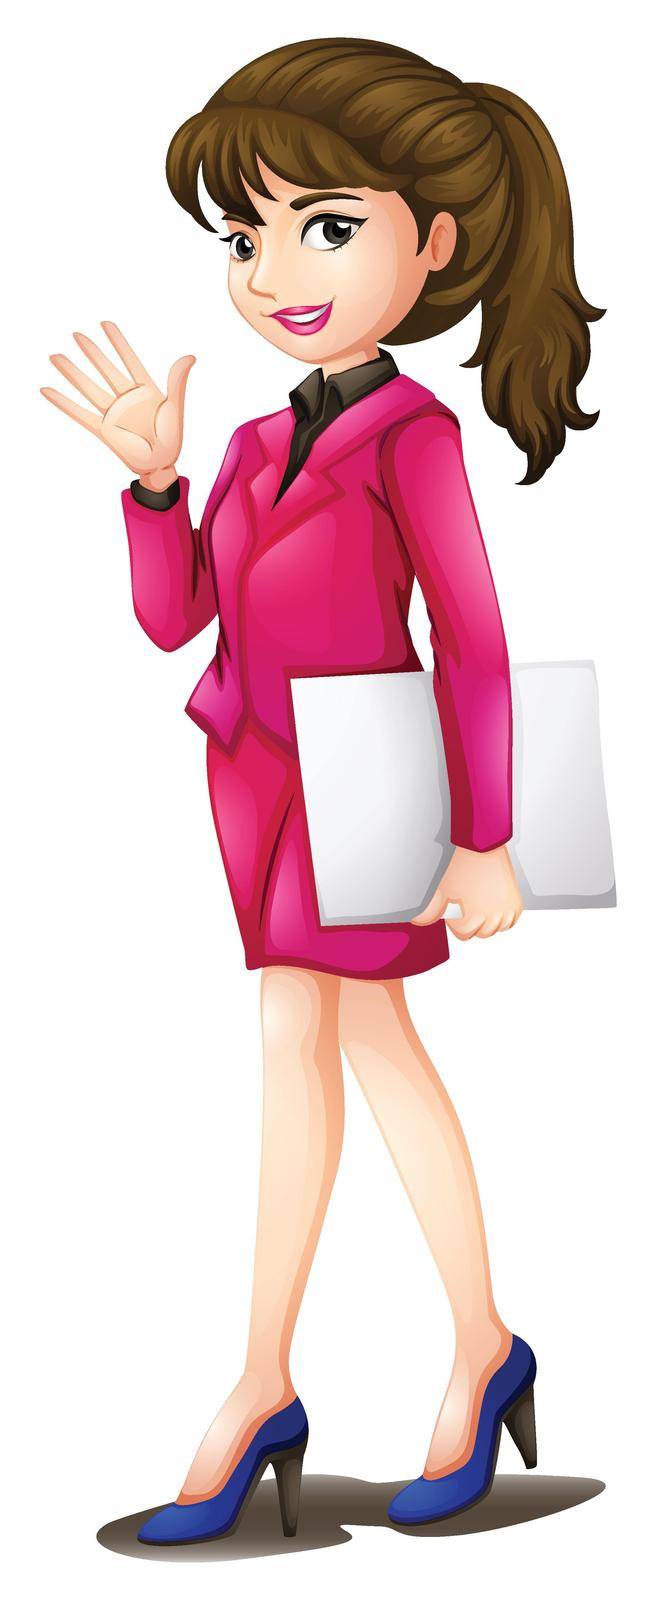 Illustration of a woman wearing a pink uniform on a white background